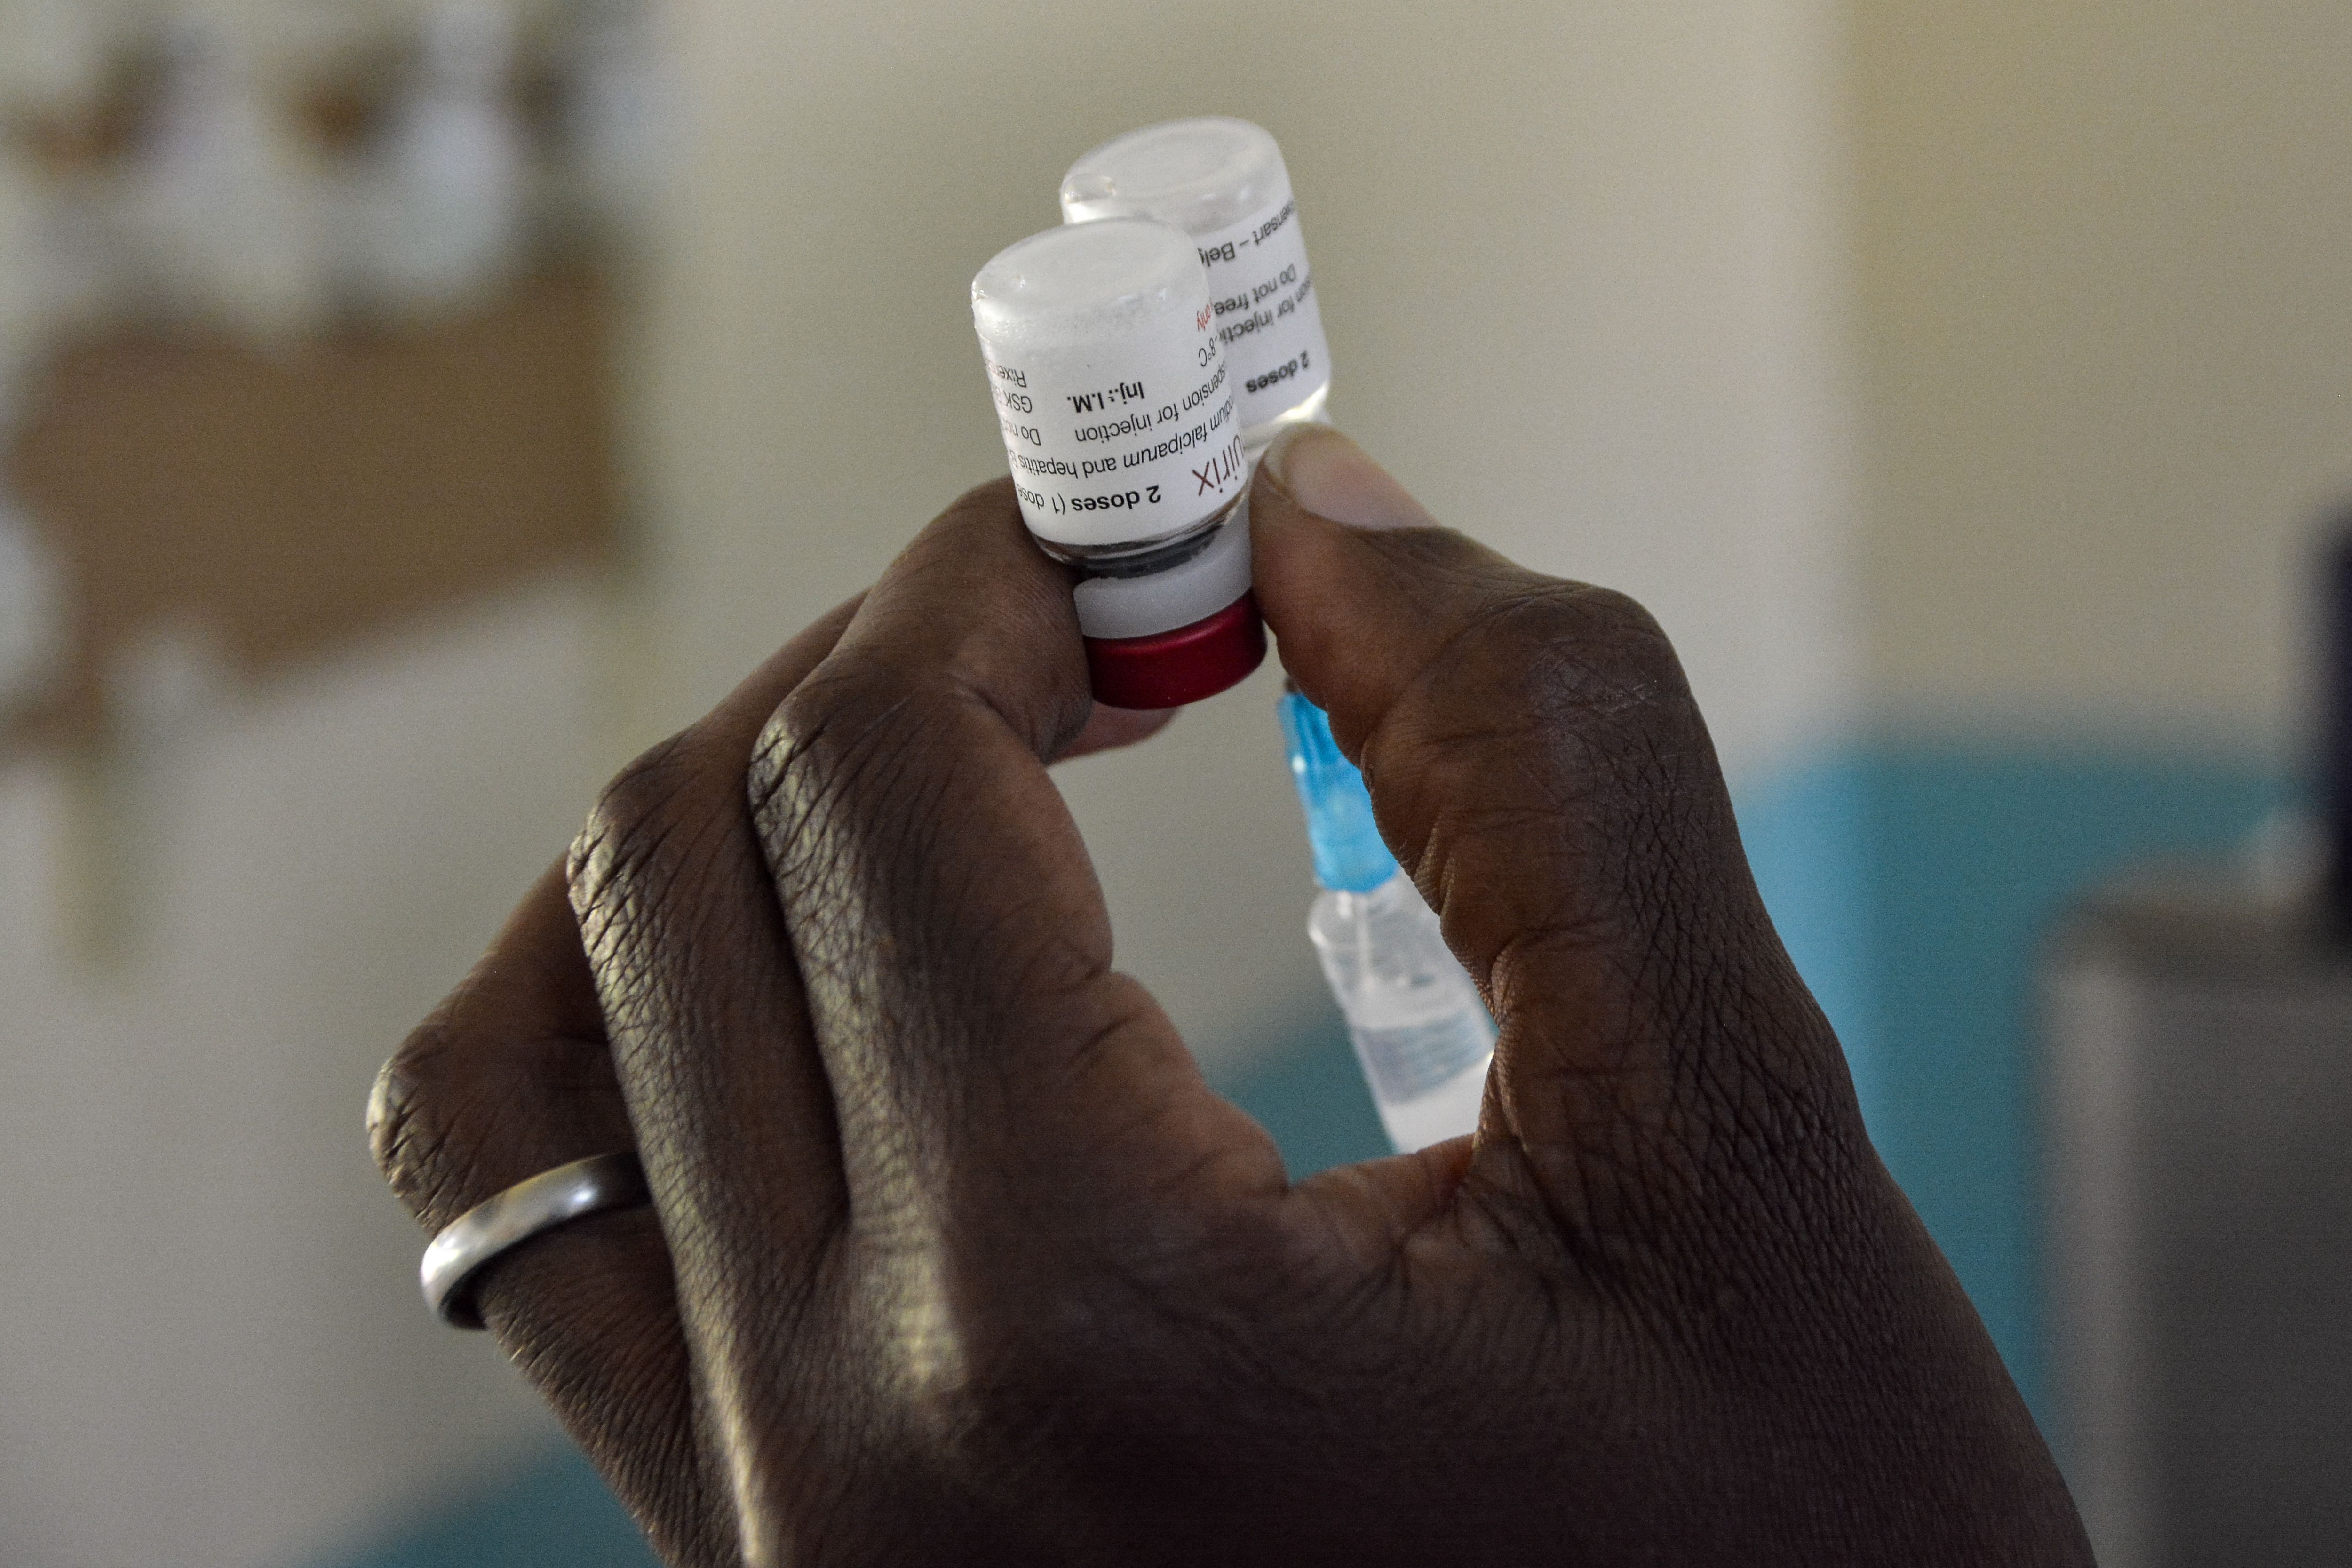 A health worker prepares a malaria vaccination for a child at Yala Sub-County hospital, in Yala, Kenya, on October 7th, 2021